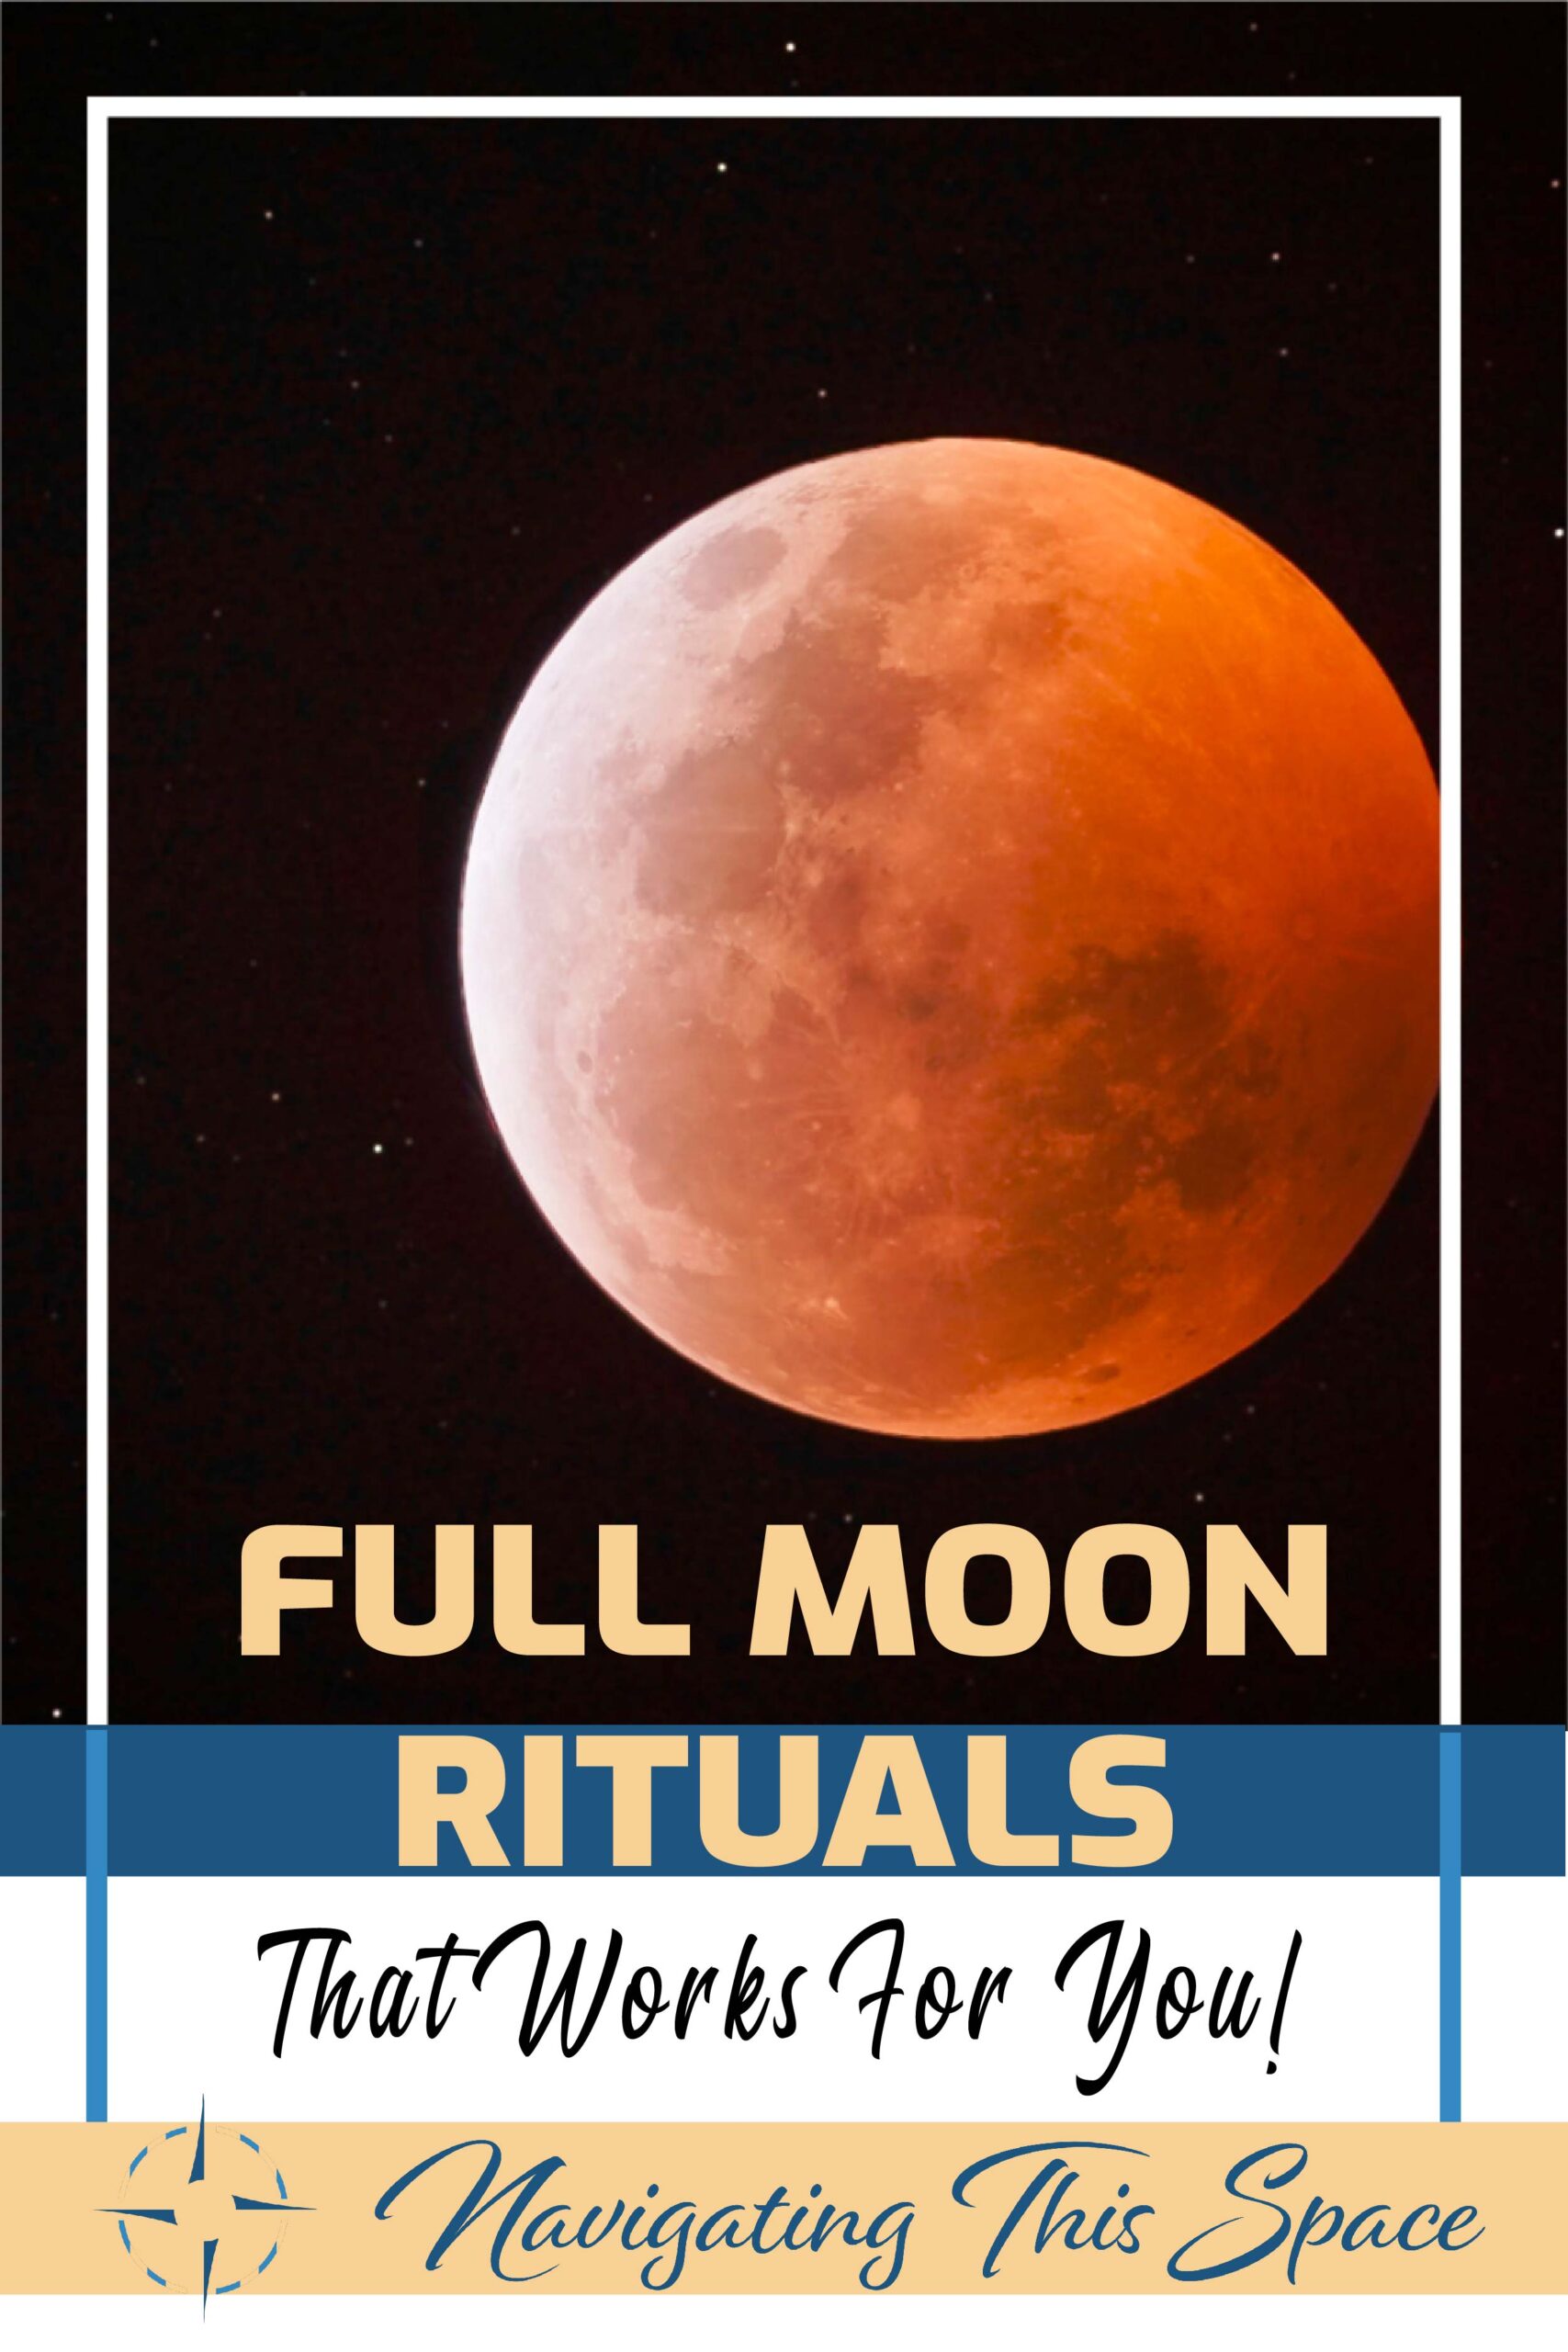 How To Set Full Moon Intentions Navigating This Space